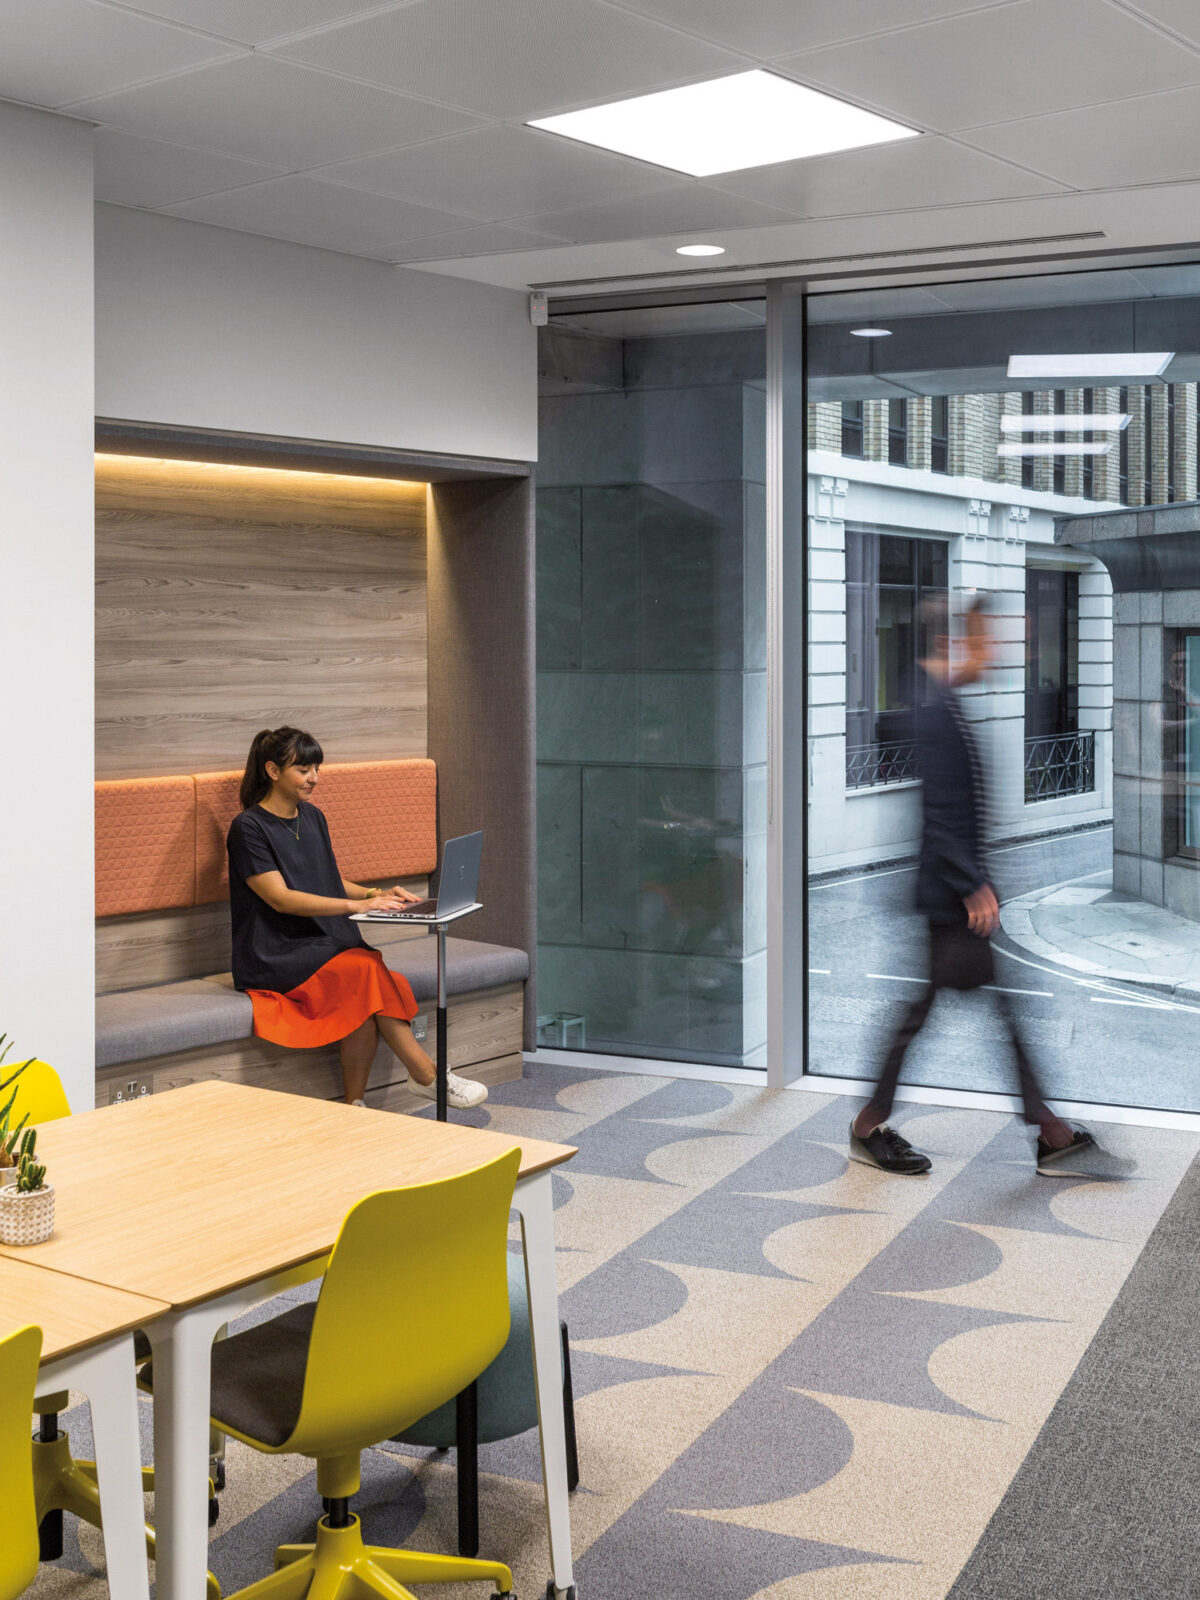 Modern office breakout space featuring a woman seated at a wall-mounted desk, warm wood paneling, vibrant orange upholstered seating, and geometric-patterned gray carpet. A blurred figure walking past the glass partition highlights the active work environment.